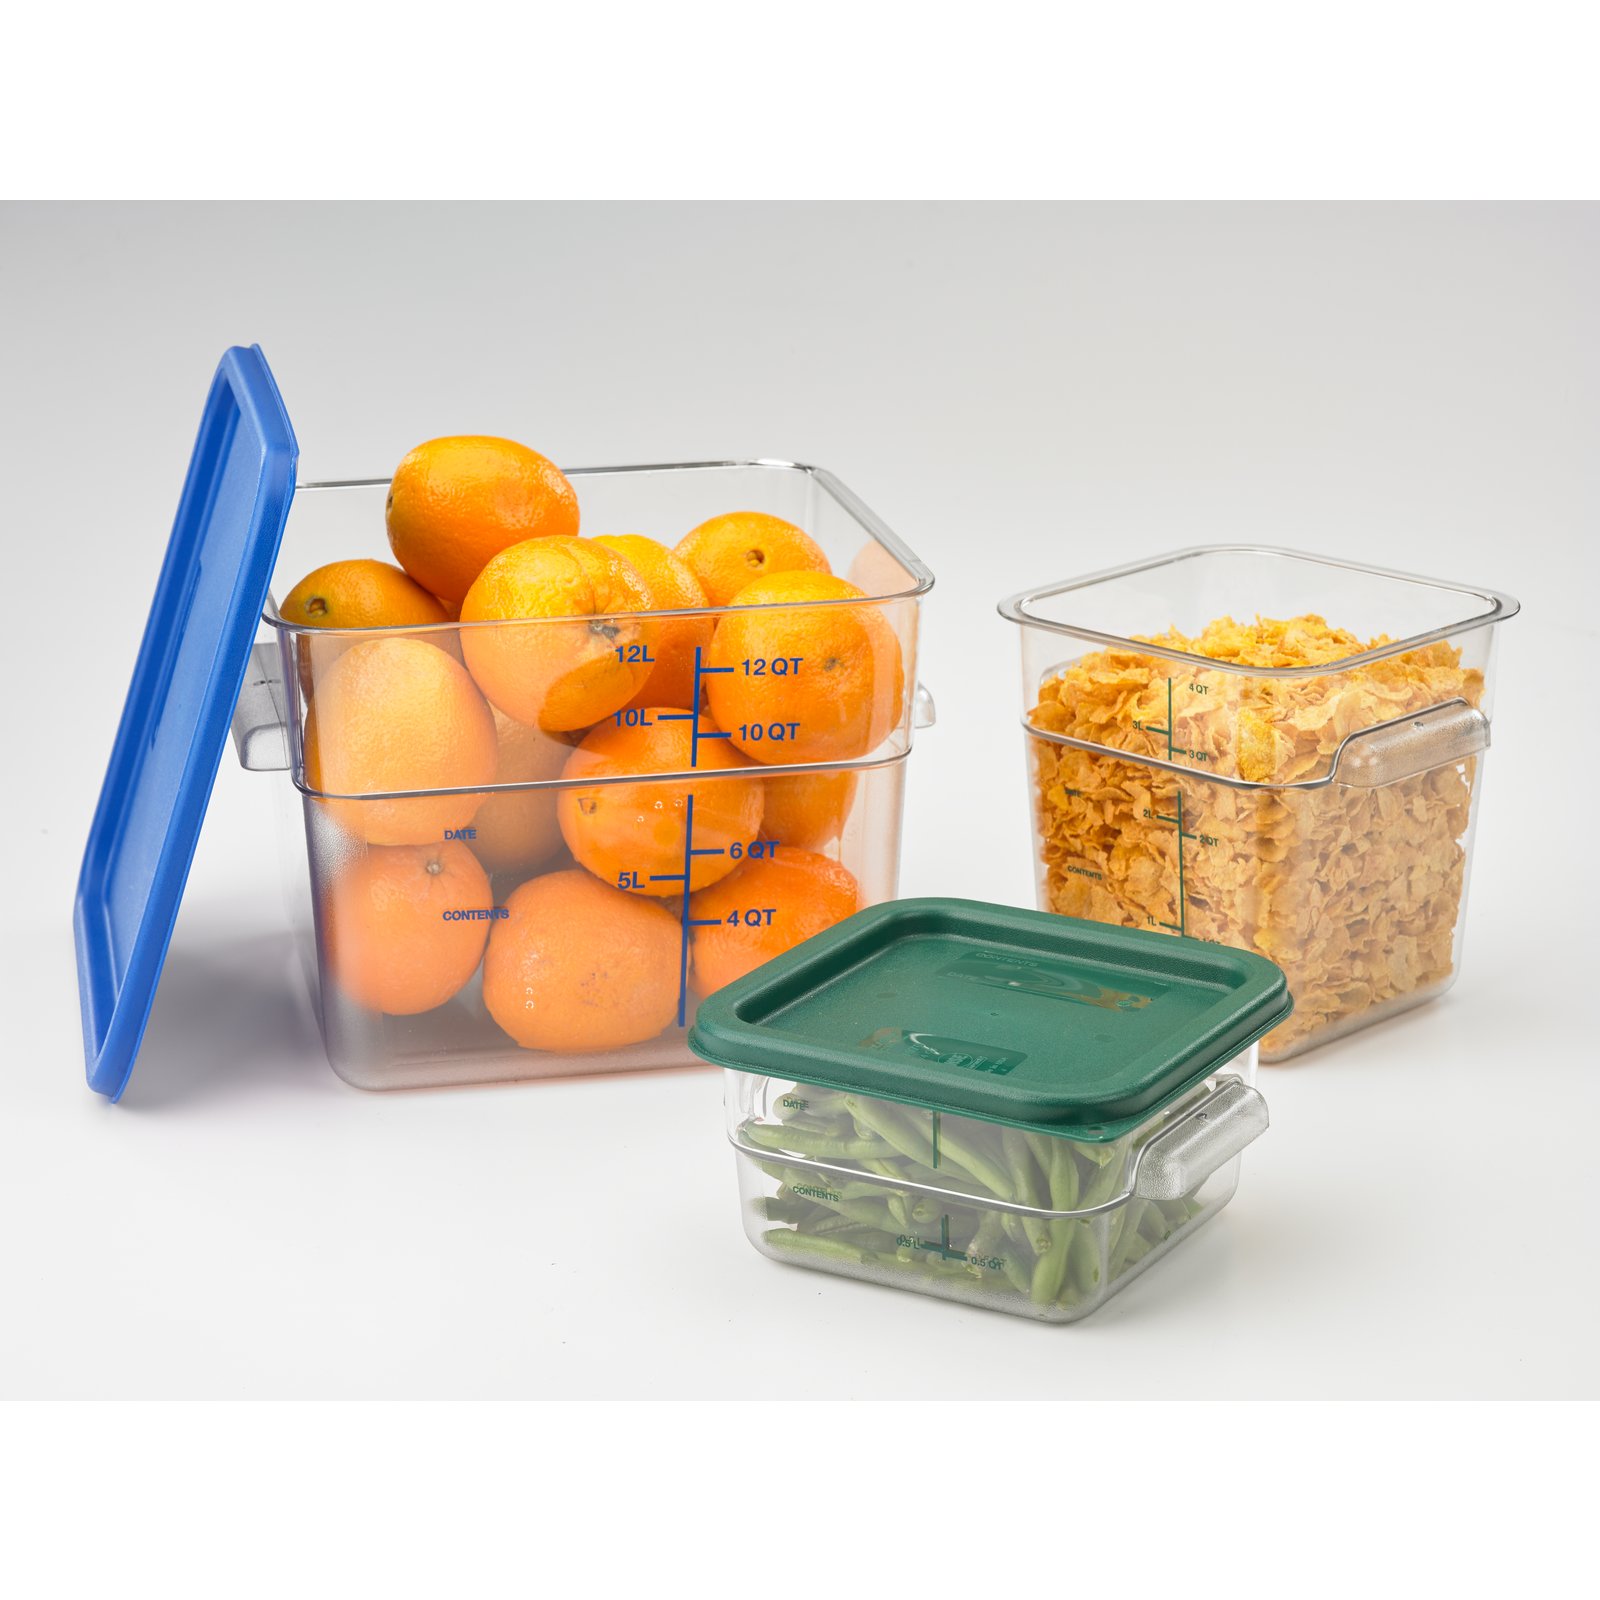 Hakka 4 qt Commercial Grade Square Food Storage Containers with Lids,Polycarbonate,Clear - Case of 5